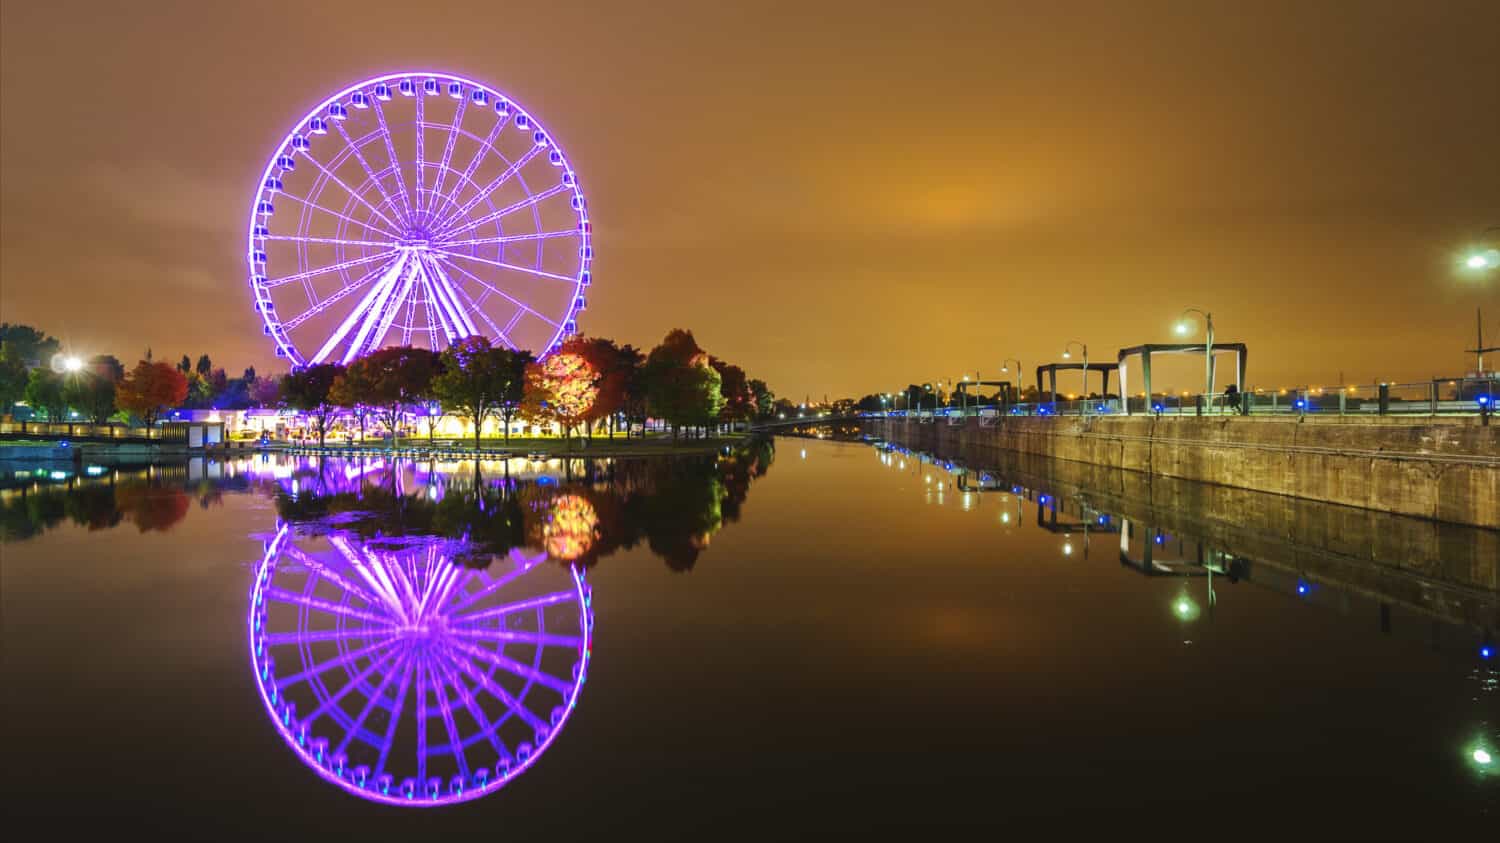 A large Ferris wheel in Montreal is effectively reflected in the water. Night city